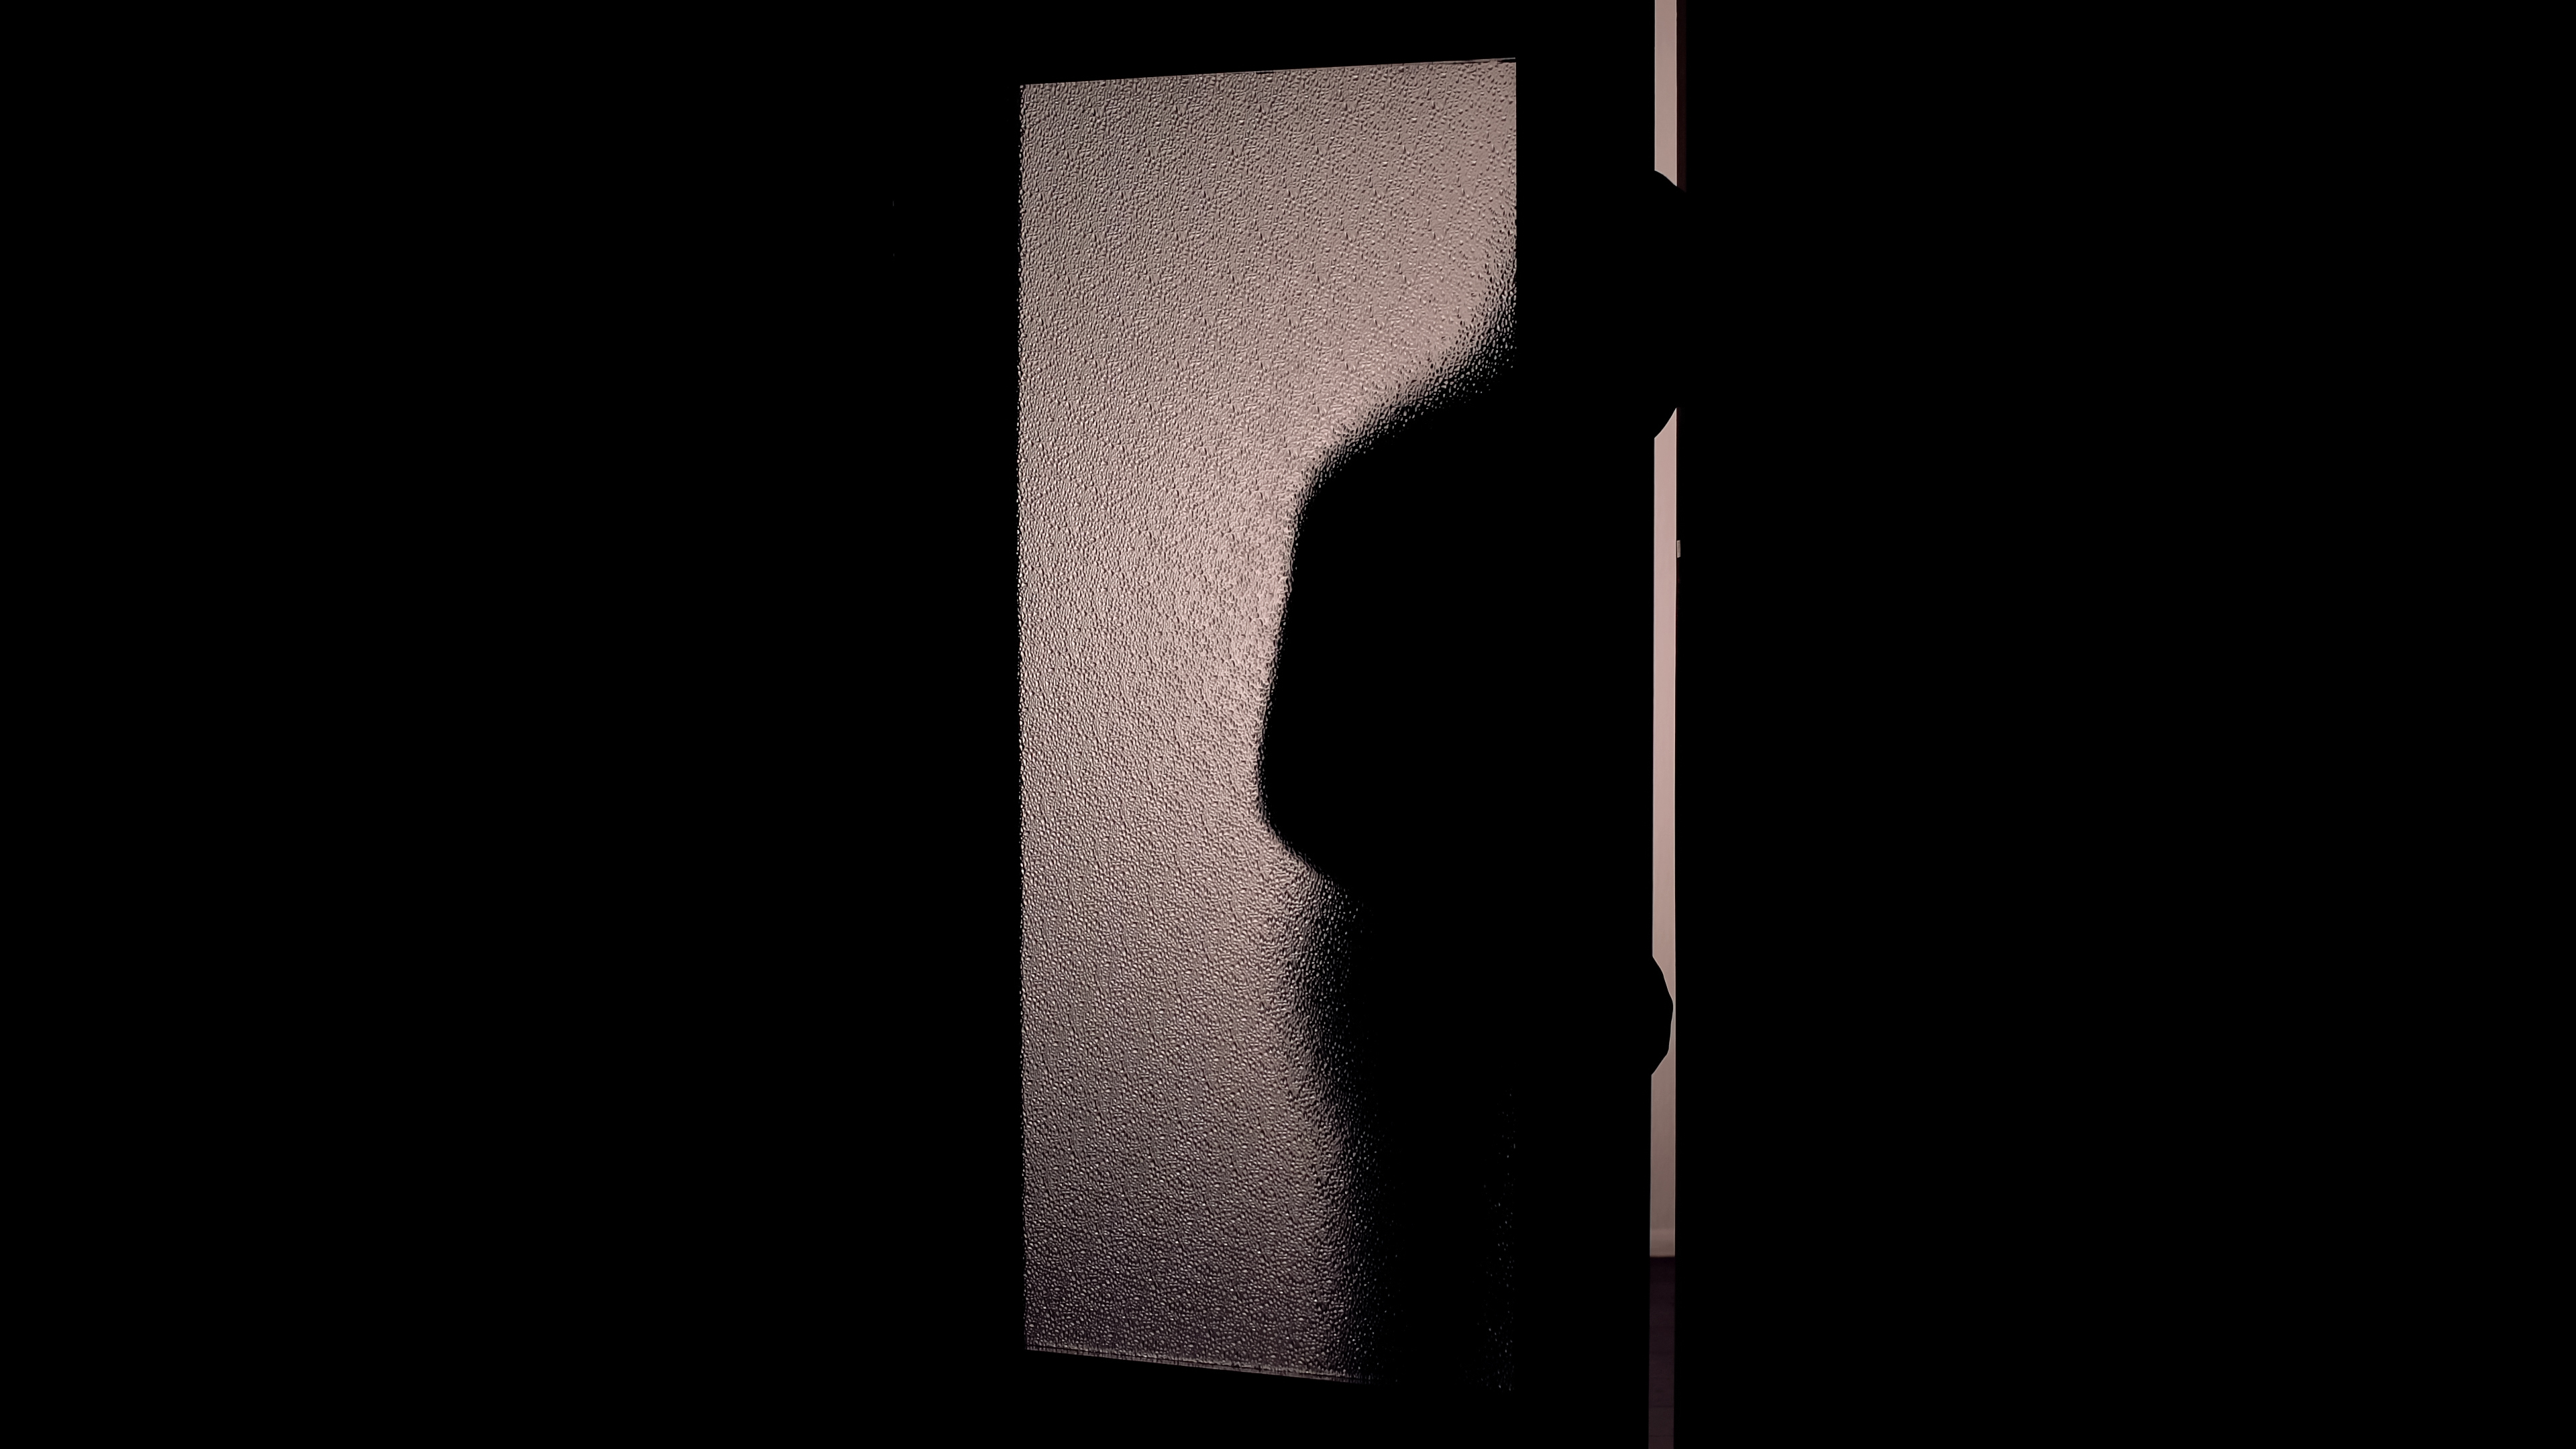 Silhouette of a person&#x27;s profile cast on a frosted glass door, suggesting mystery or suspense